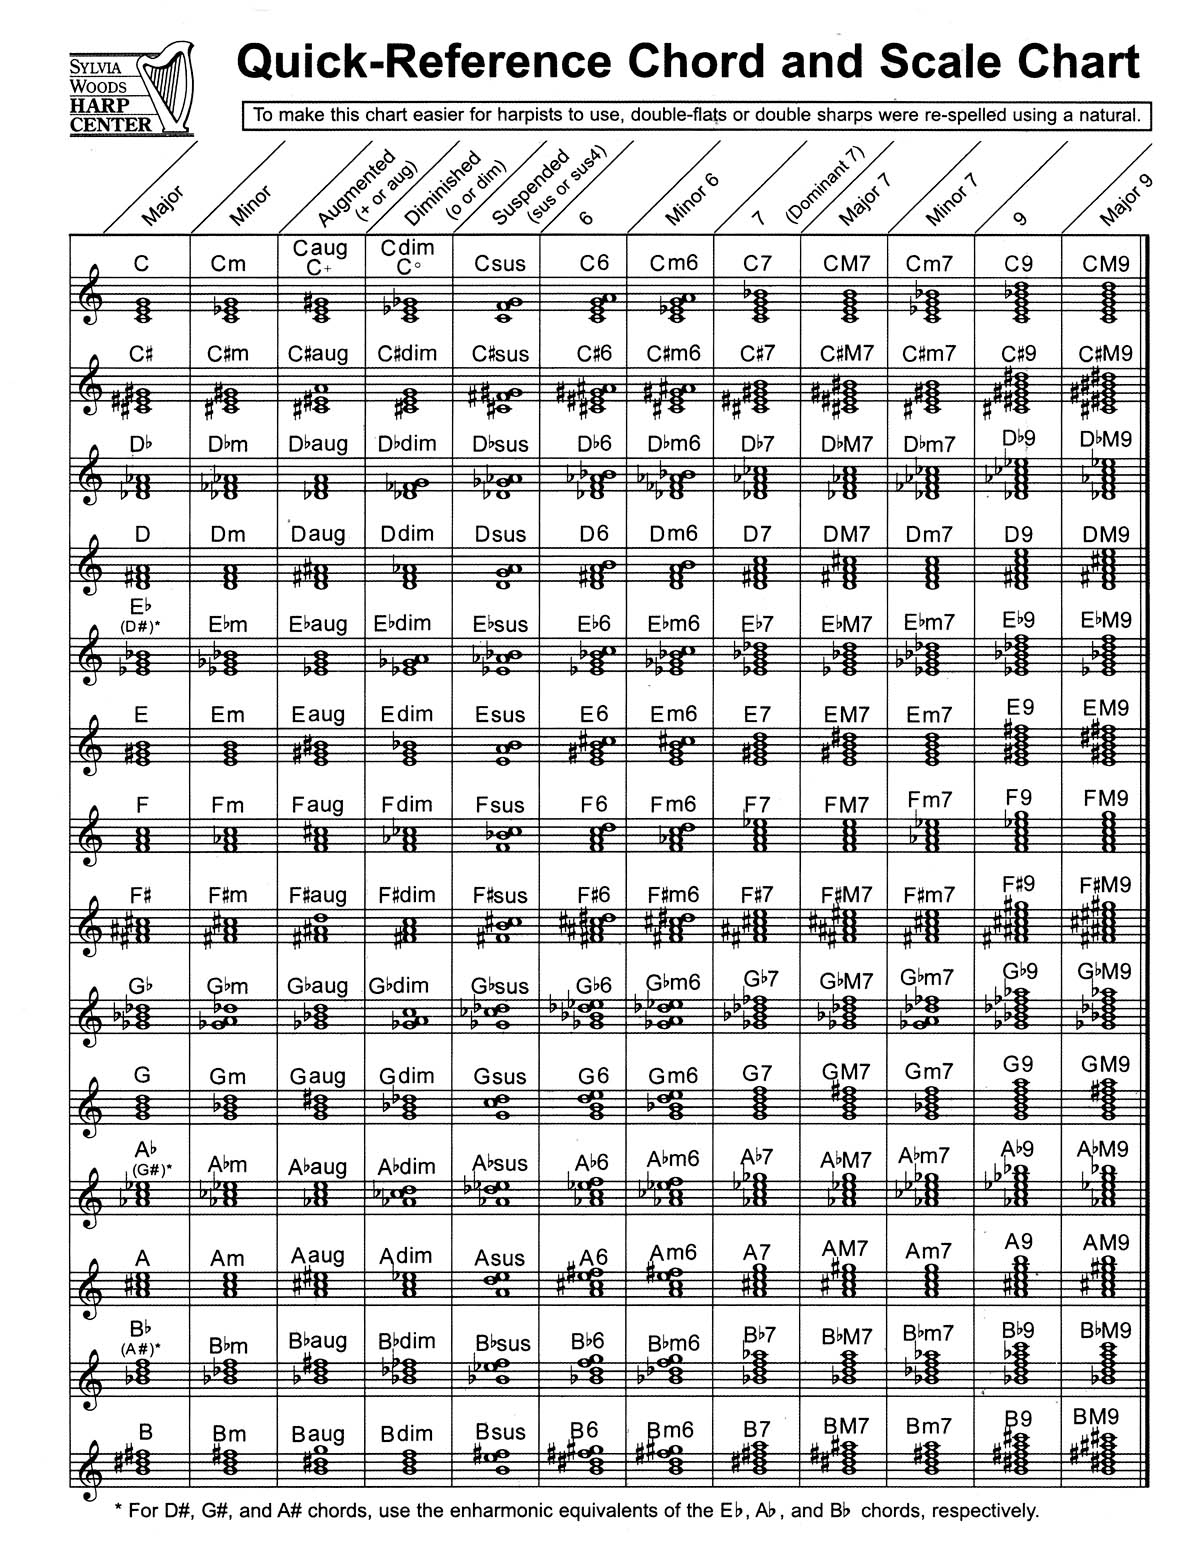 Quick-Refuerence Chord And Scale Chart(fuer Harp)